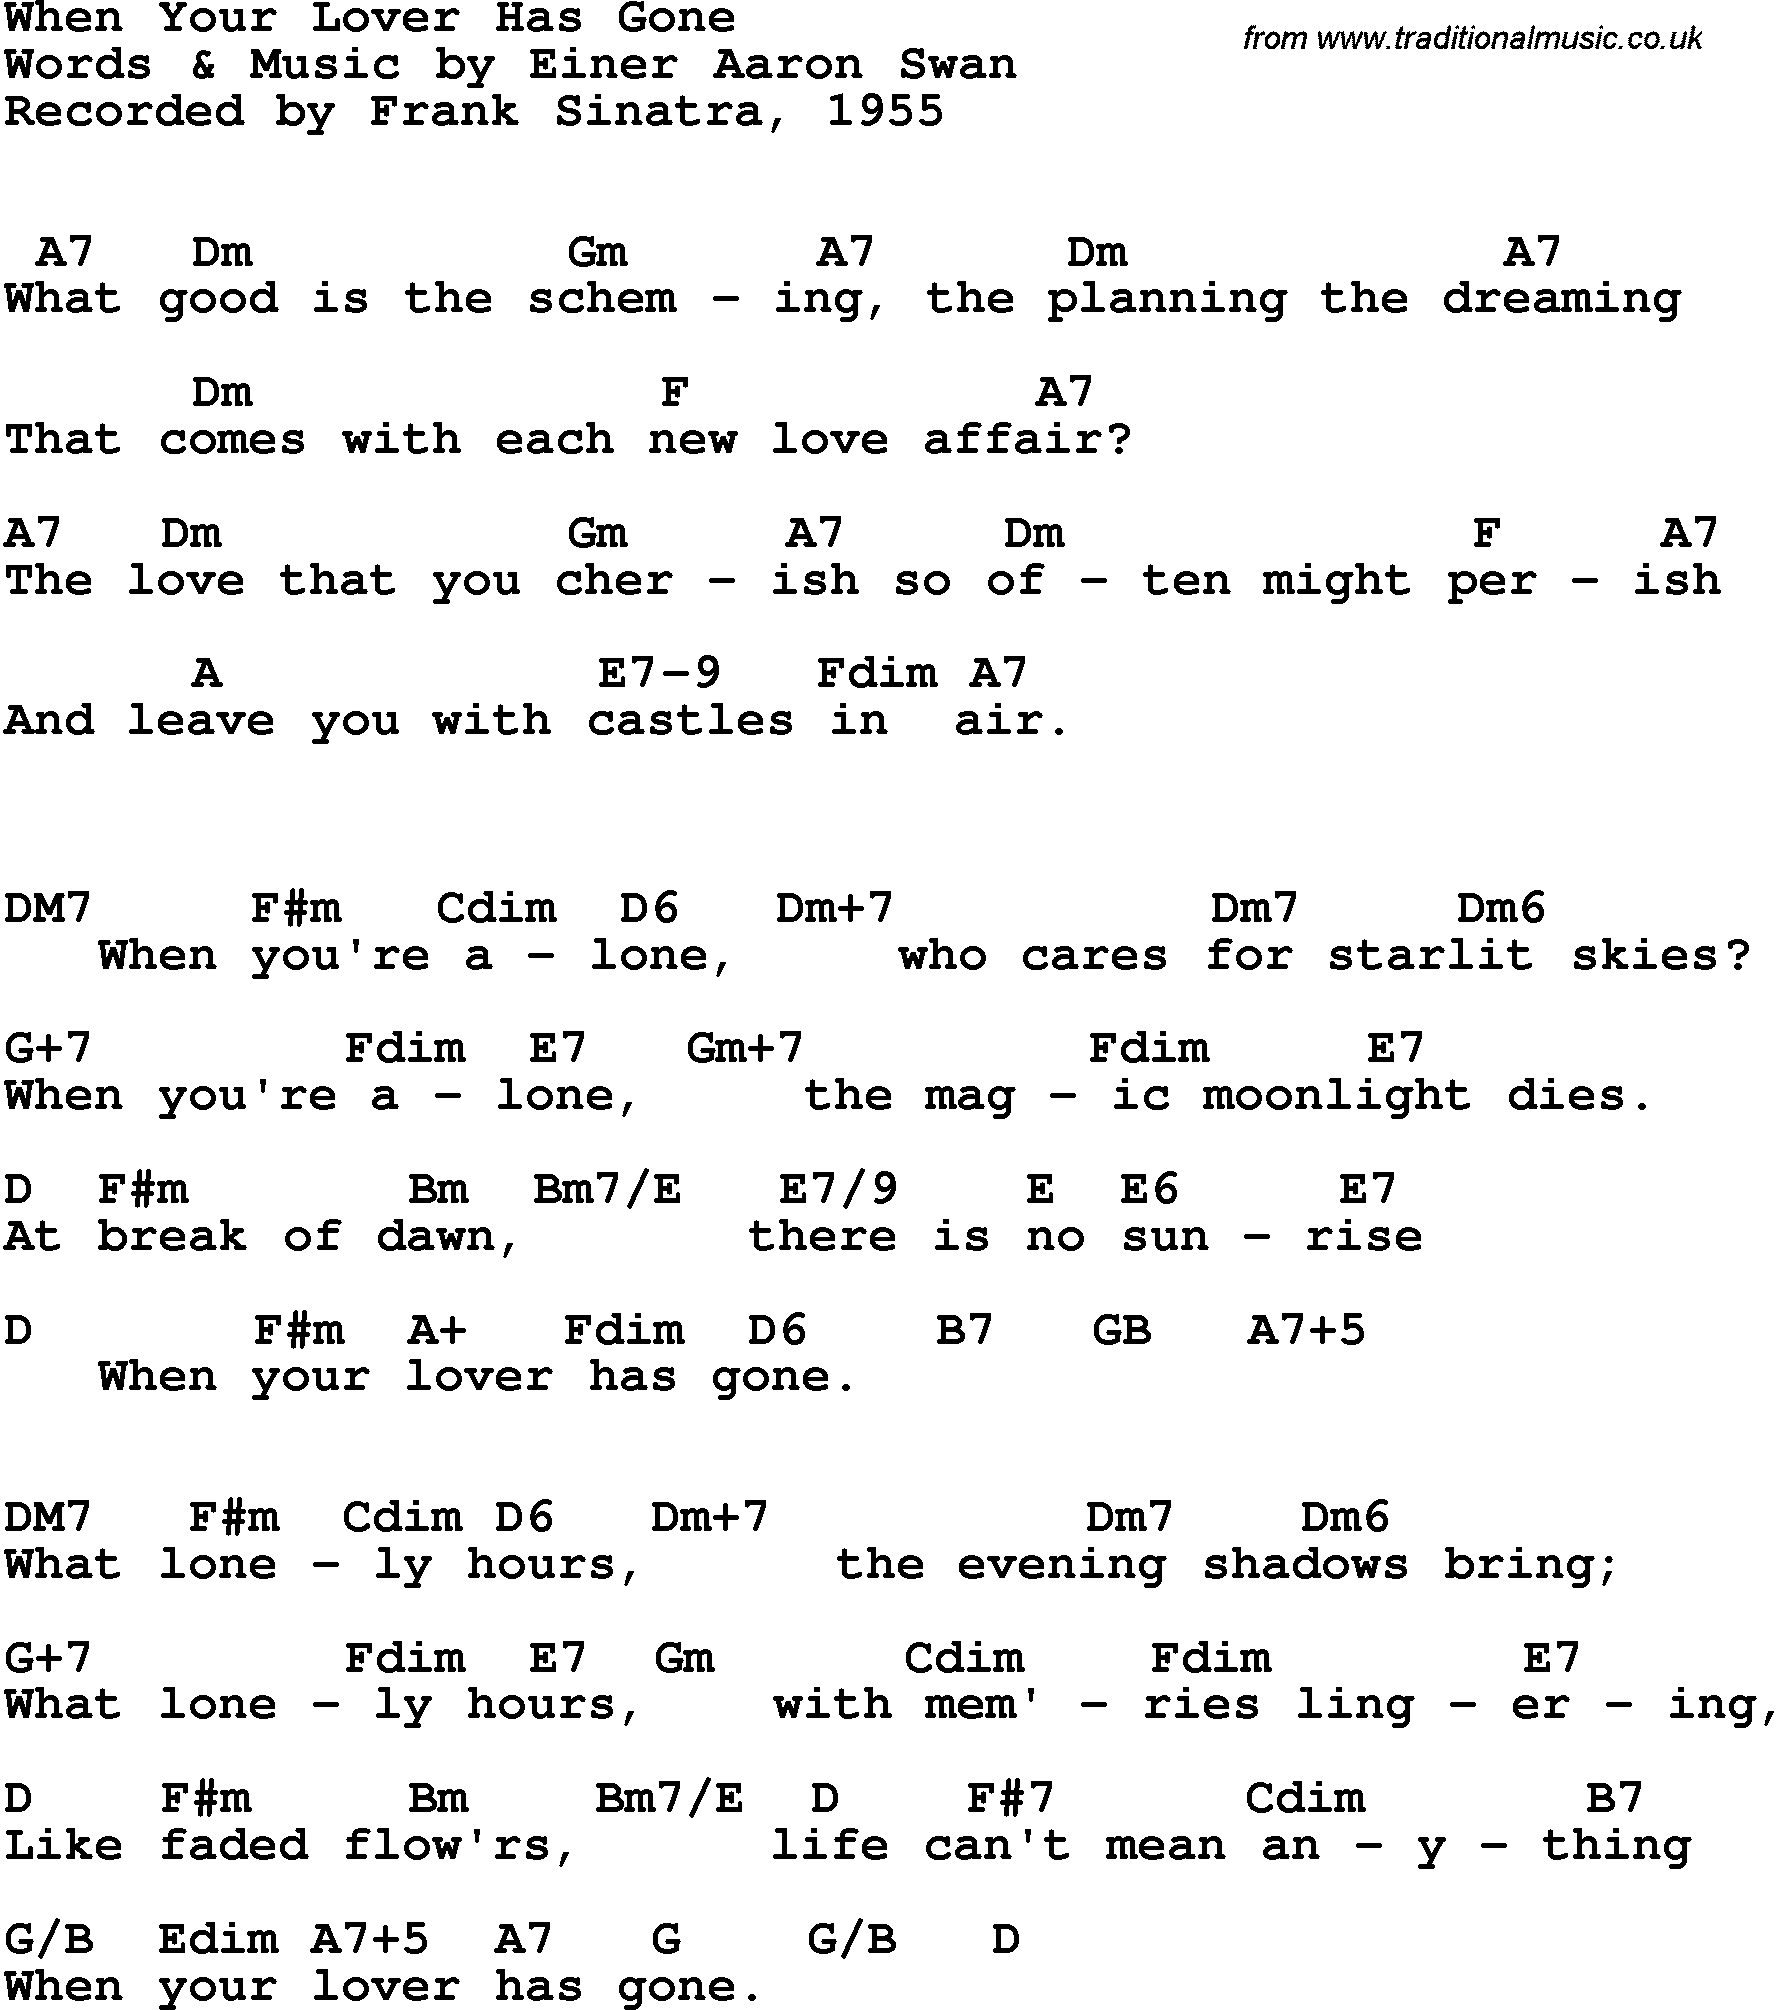 Song Lyrics with guitar chords for When Your Lover Has Gone - Frank Sinatra, 1955